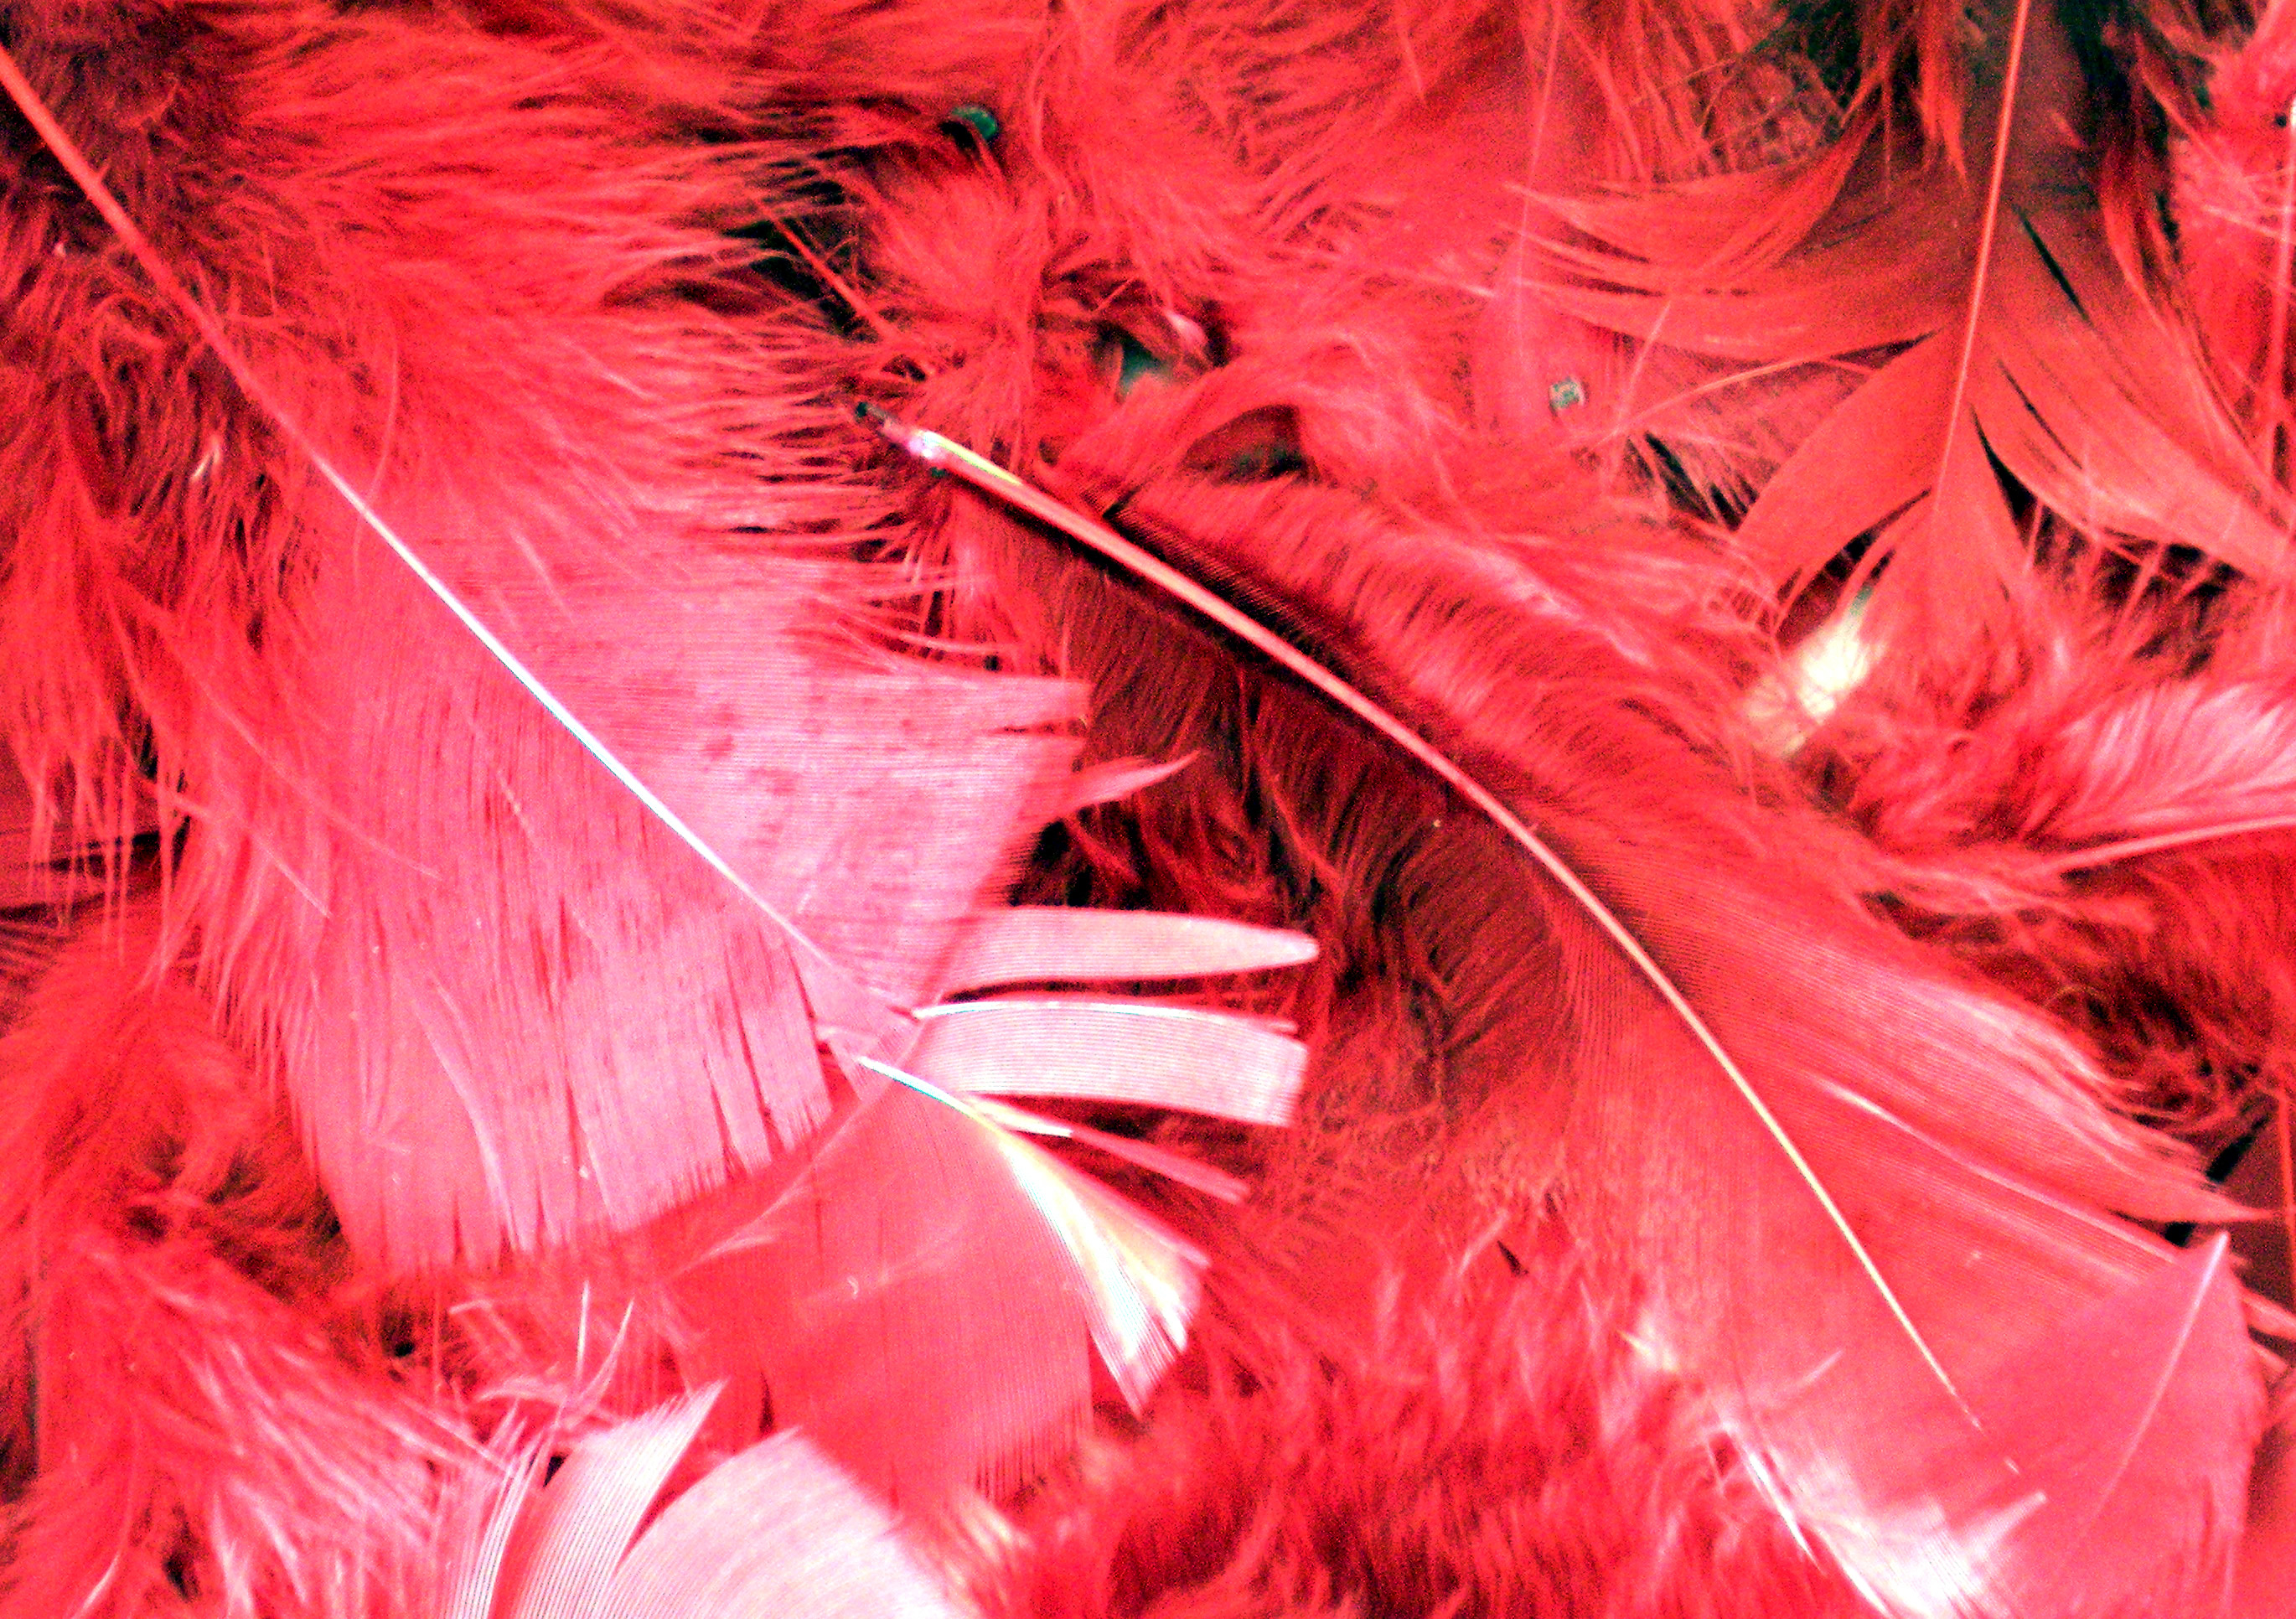  , , texture feather, download background, photo, image, pink flamingo feathre background texture